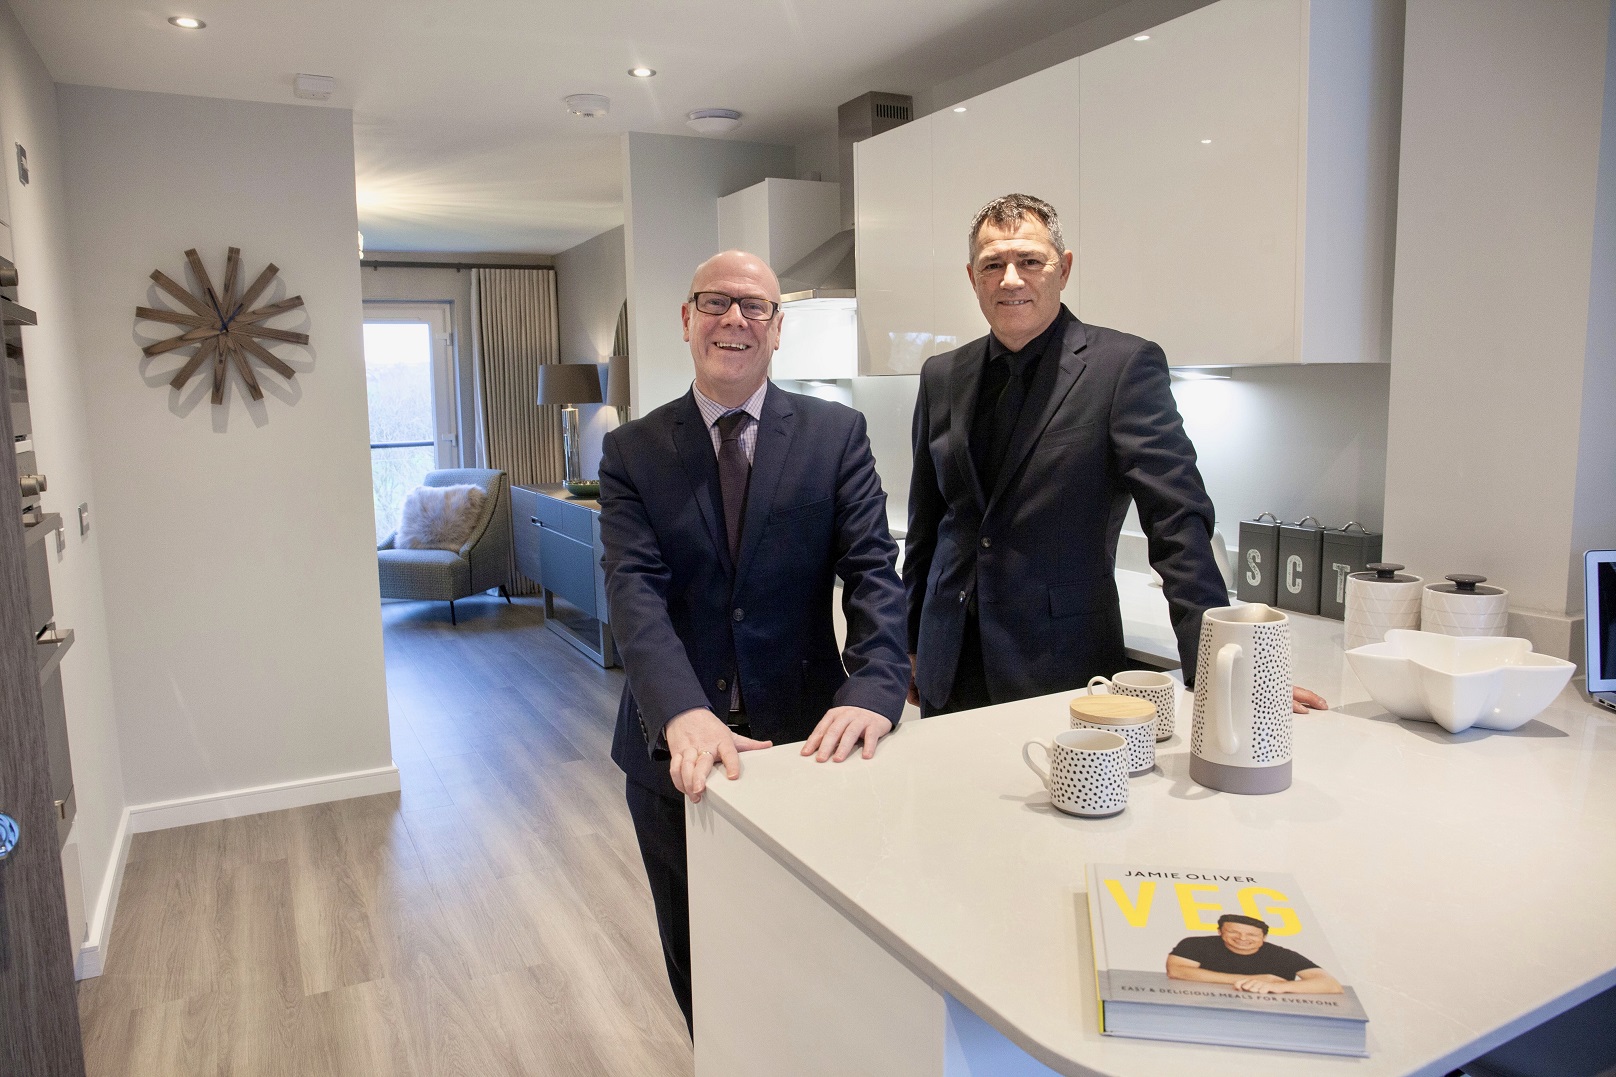 CCG Homes welcomes housing minister to flagship development